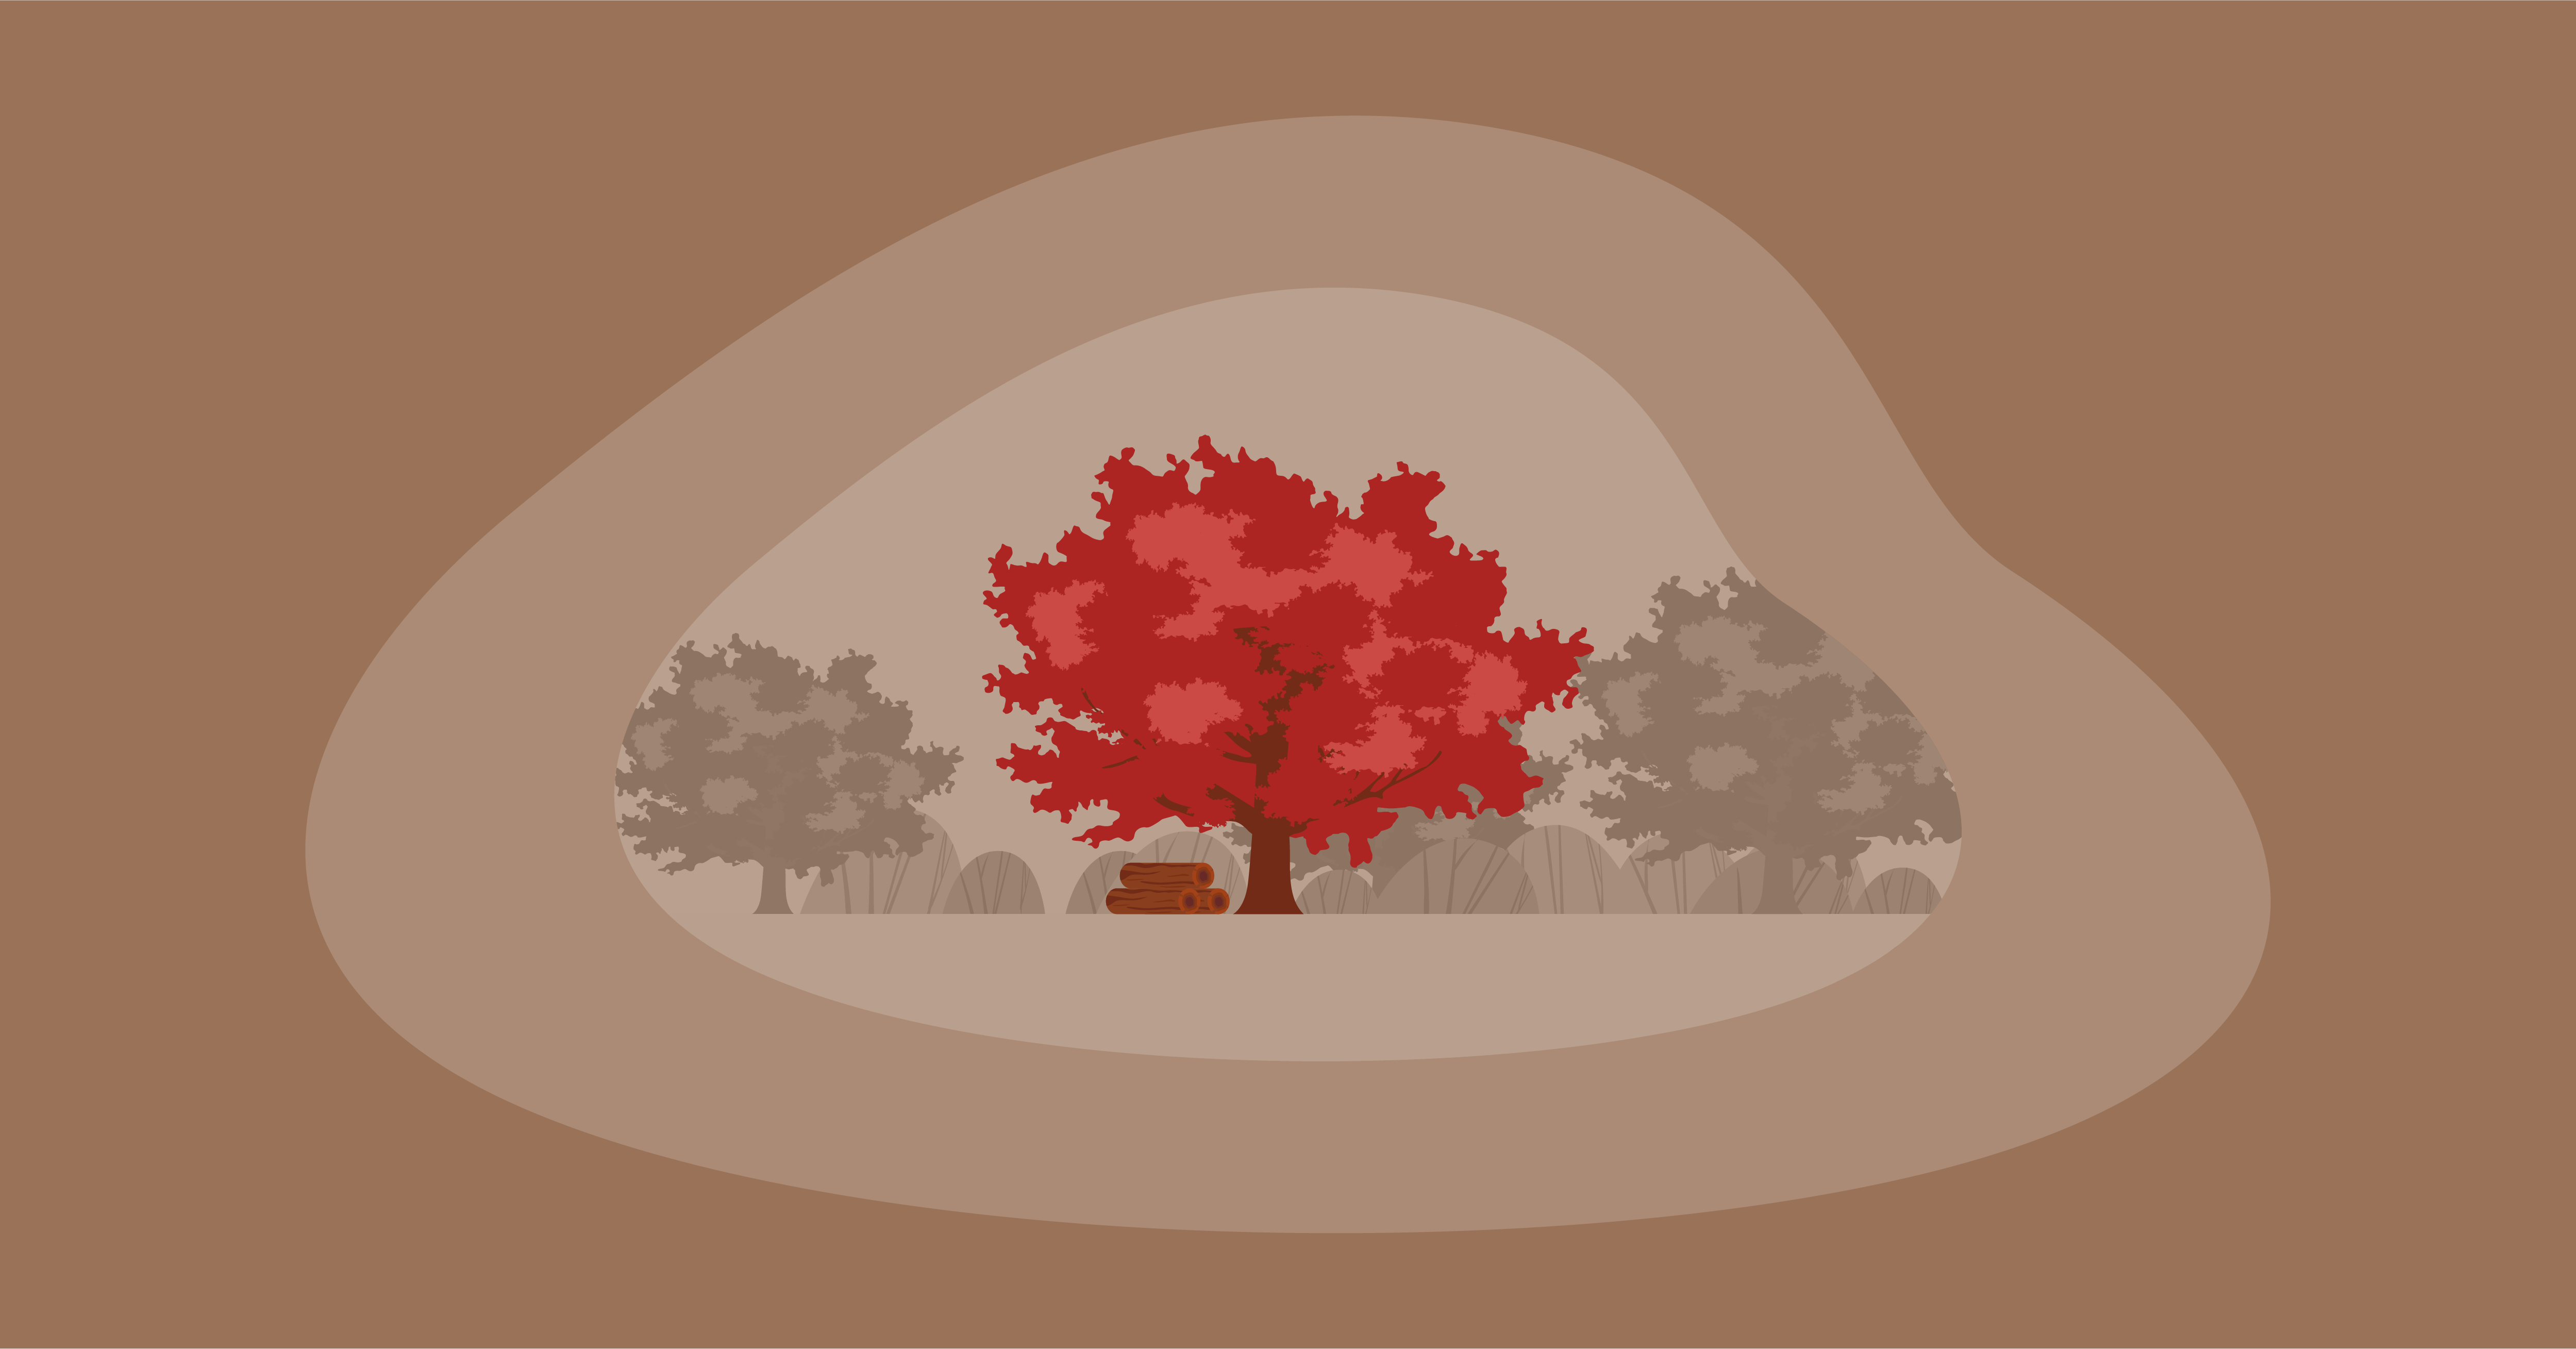 Illustration of a red oak tree and wood